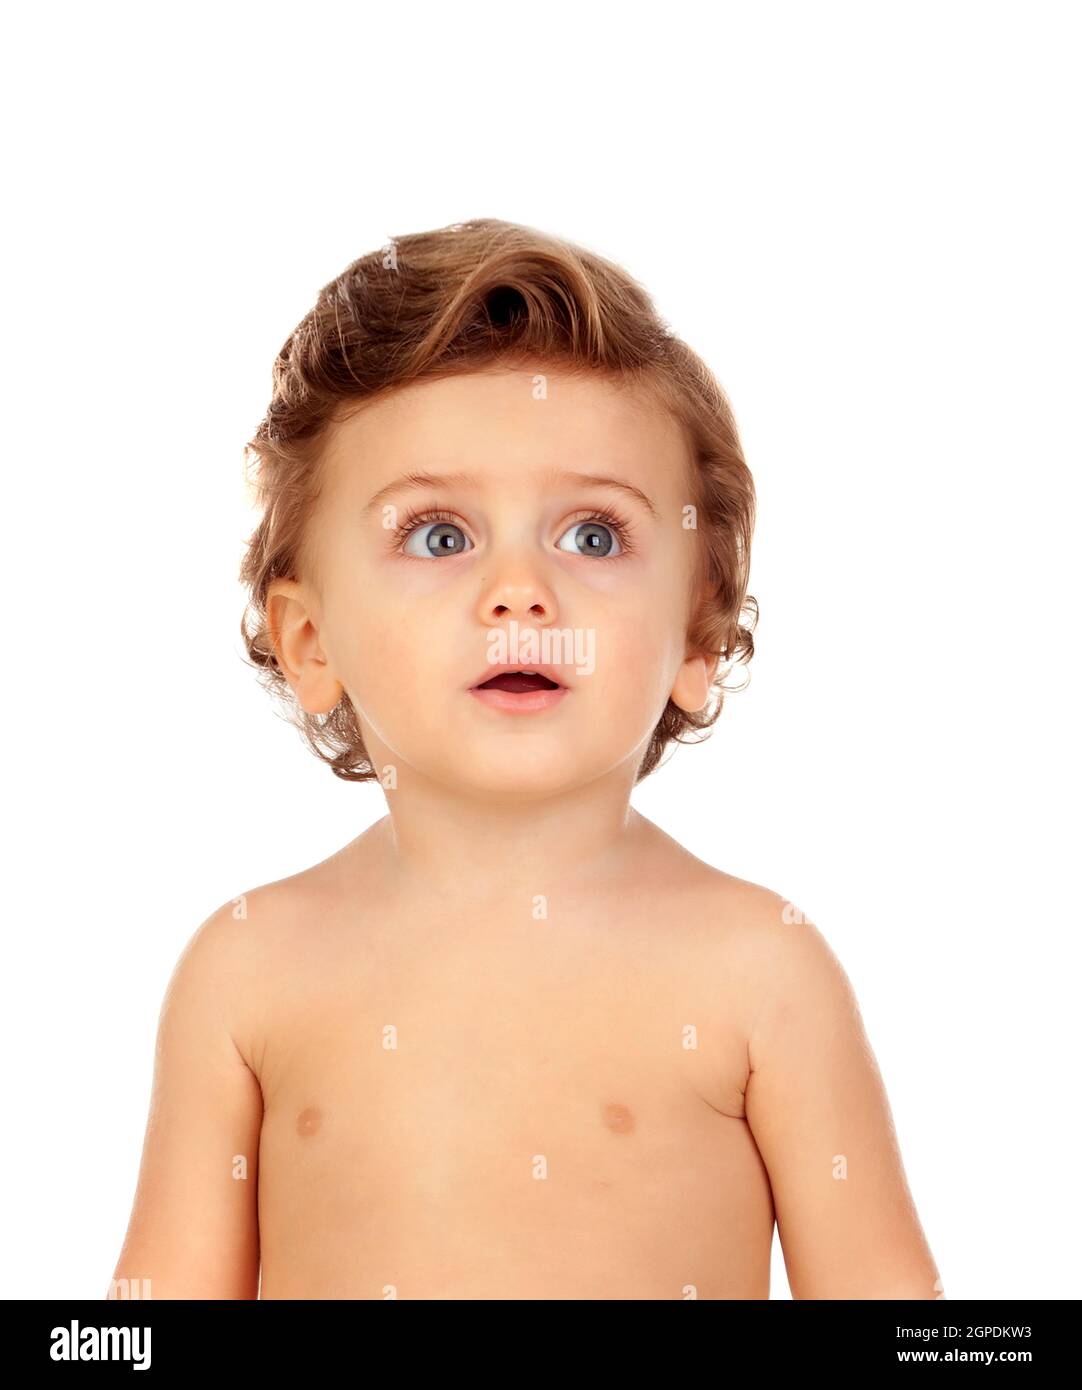 Funny expression of a beautiful baby isolated on a white background Stock Photo